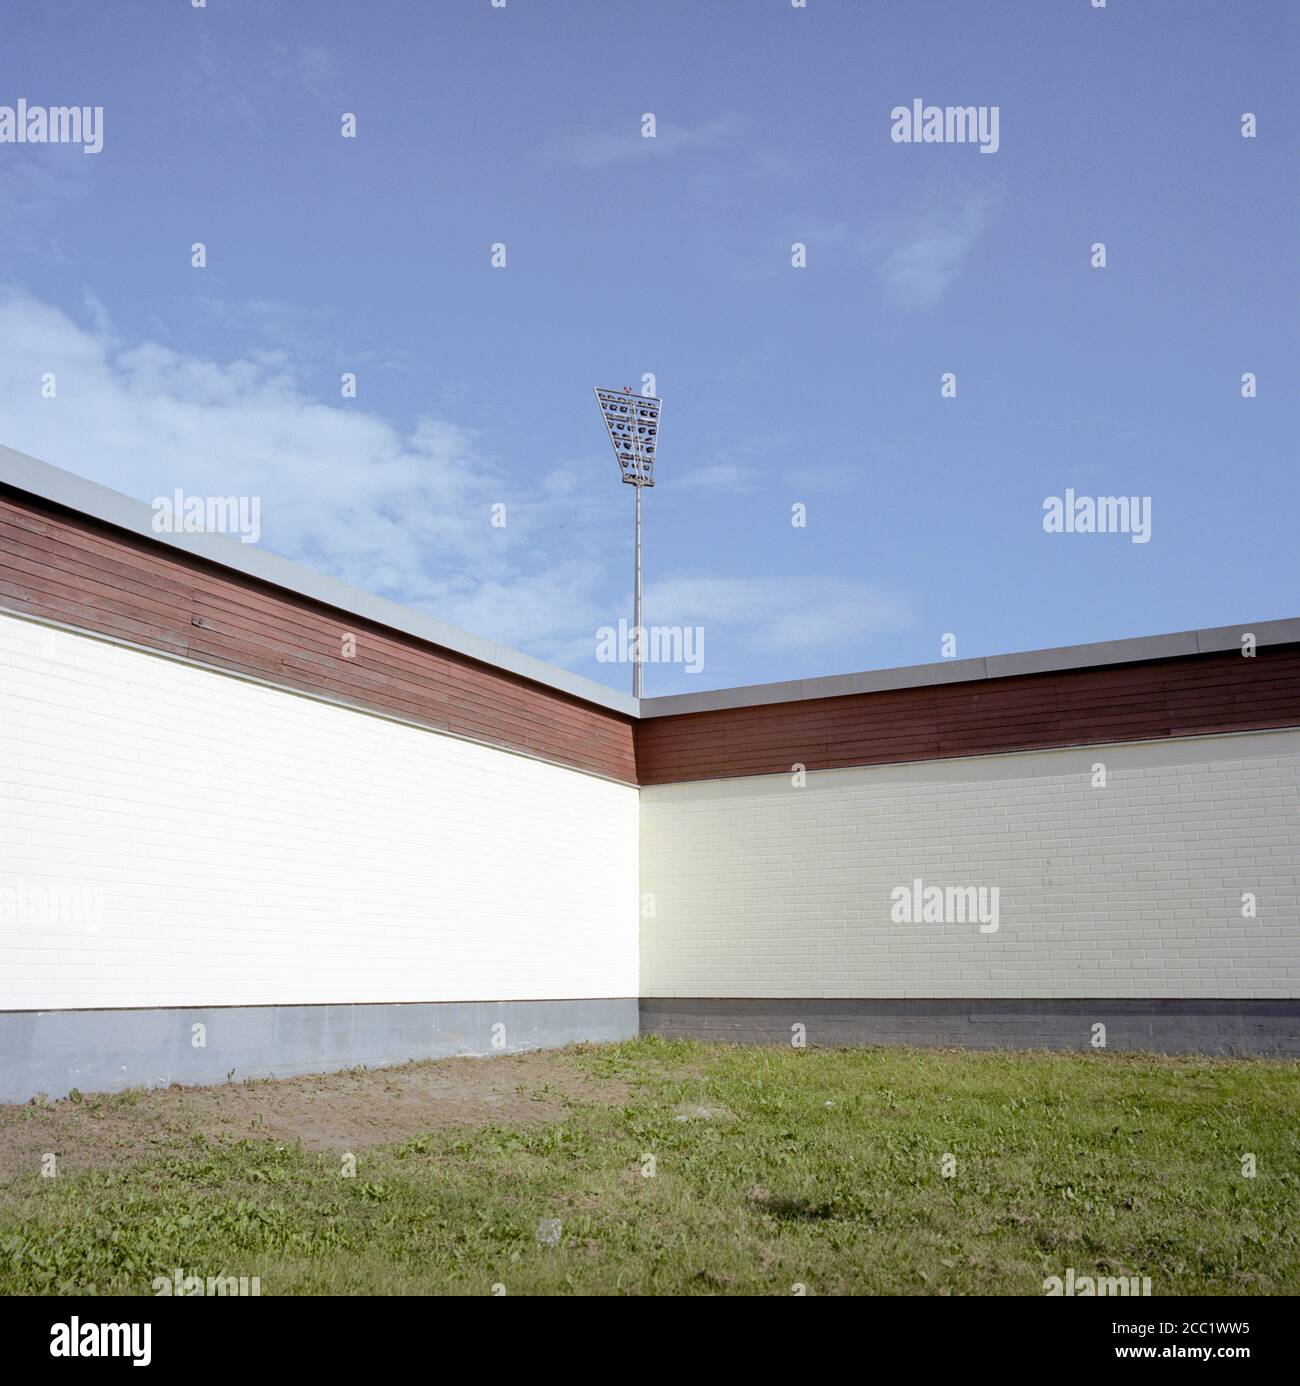 Finland, Floodlight behind wall Stock Photo